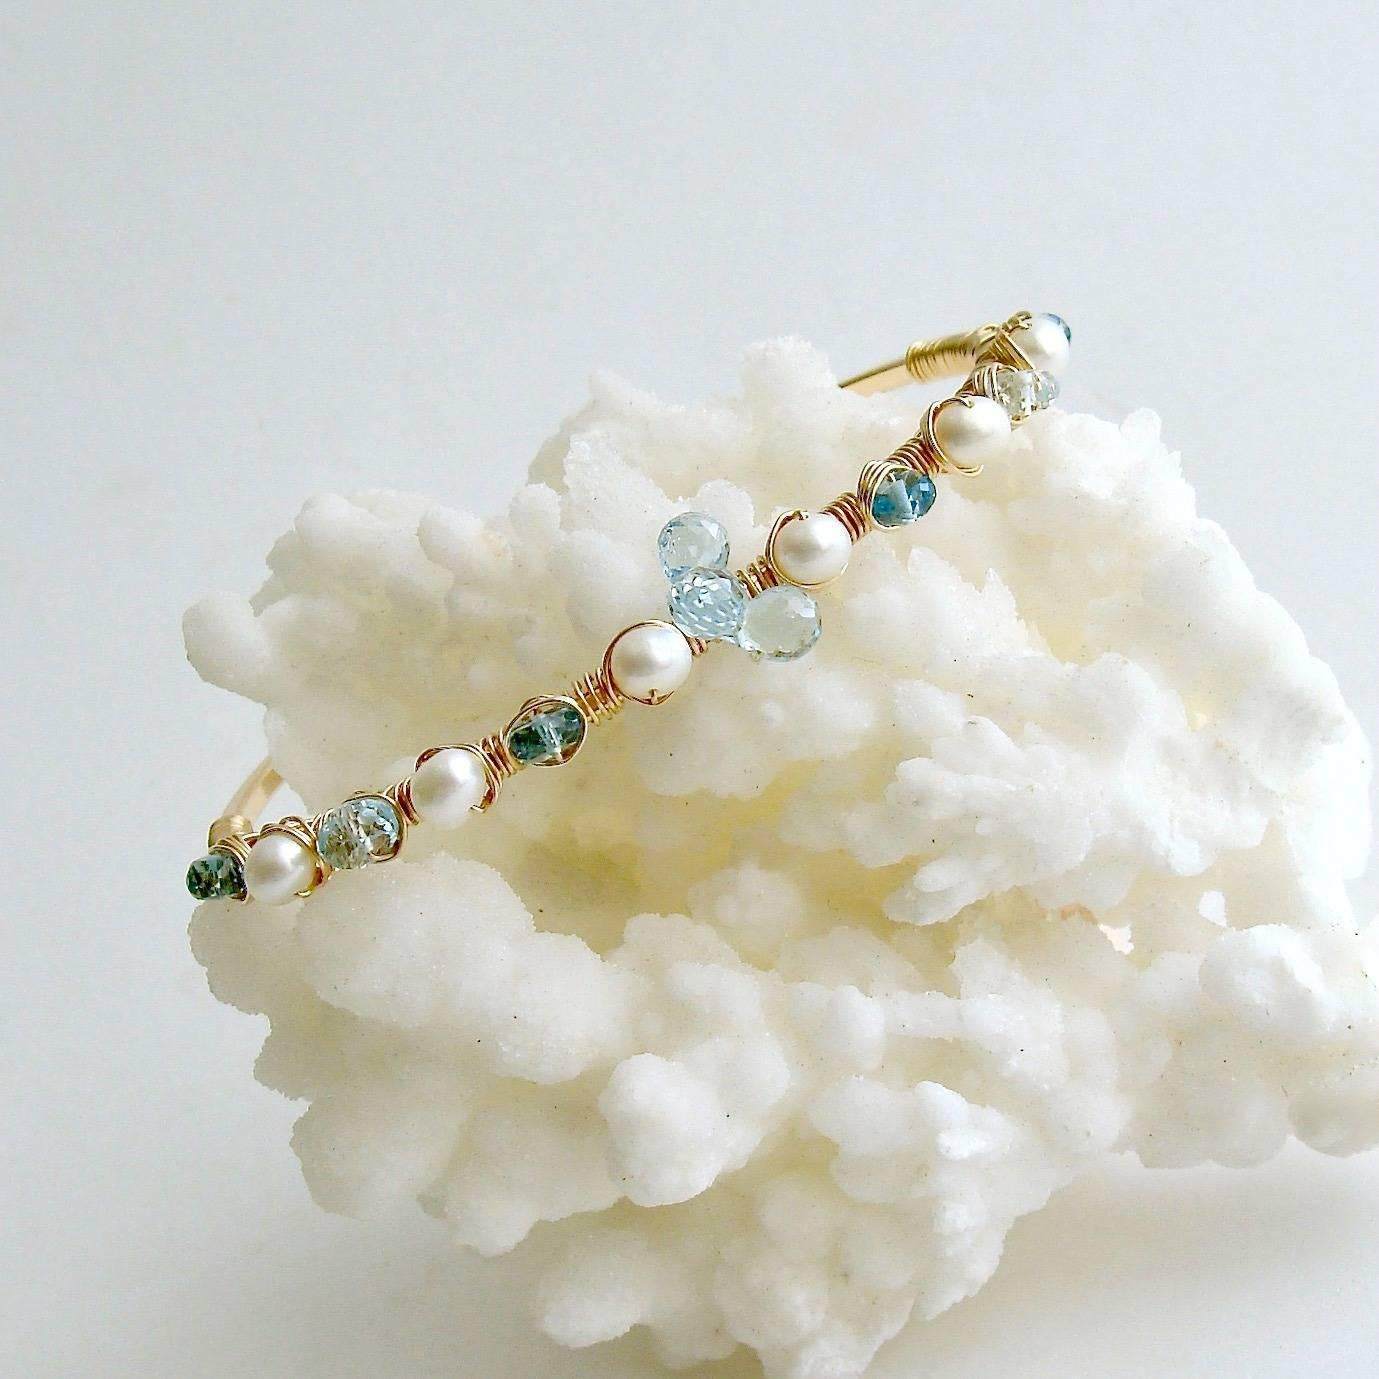 Diana Stacking Bracelet.

A delicate hand wrapped bracelet of 14/20 gold-filled wire is adorned with clusters of sky blue topaz briolettes, cultured pearls and London blue topaz.  These dainty bracelets are not only comfortable and lightweight worn